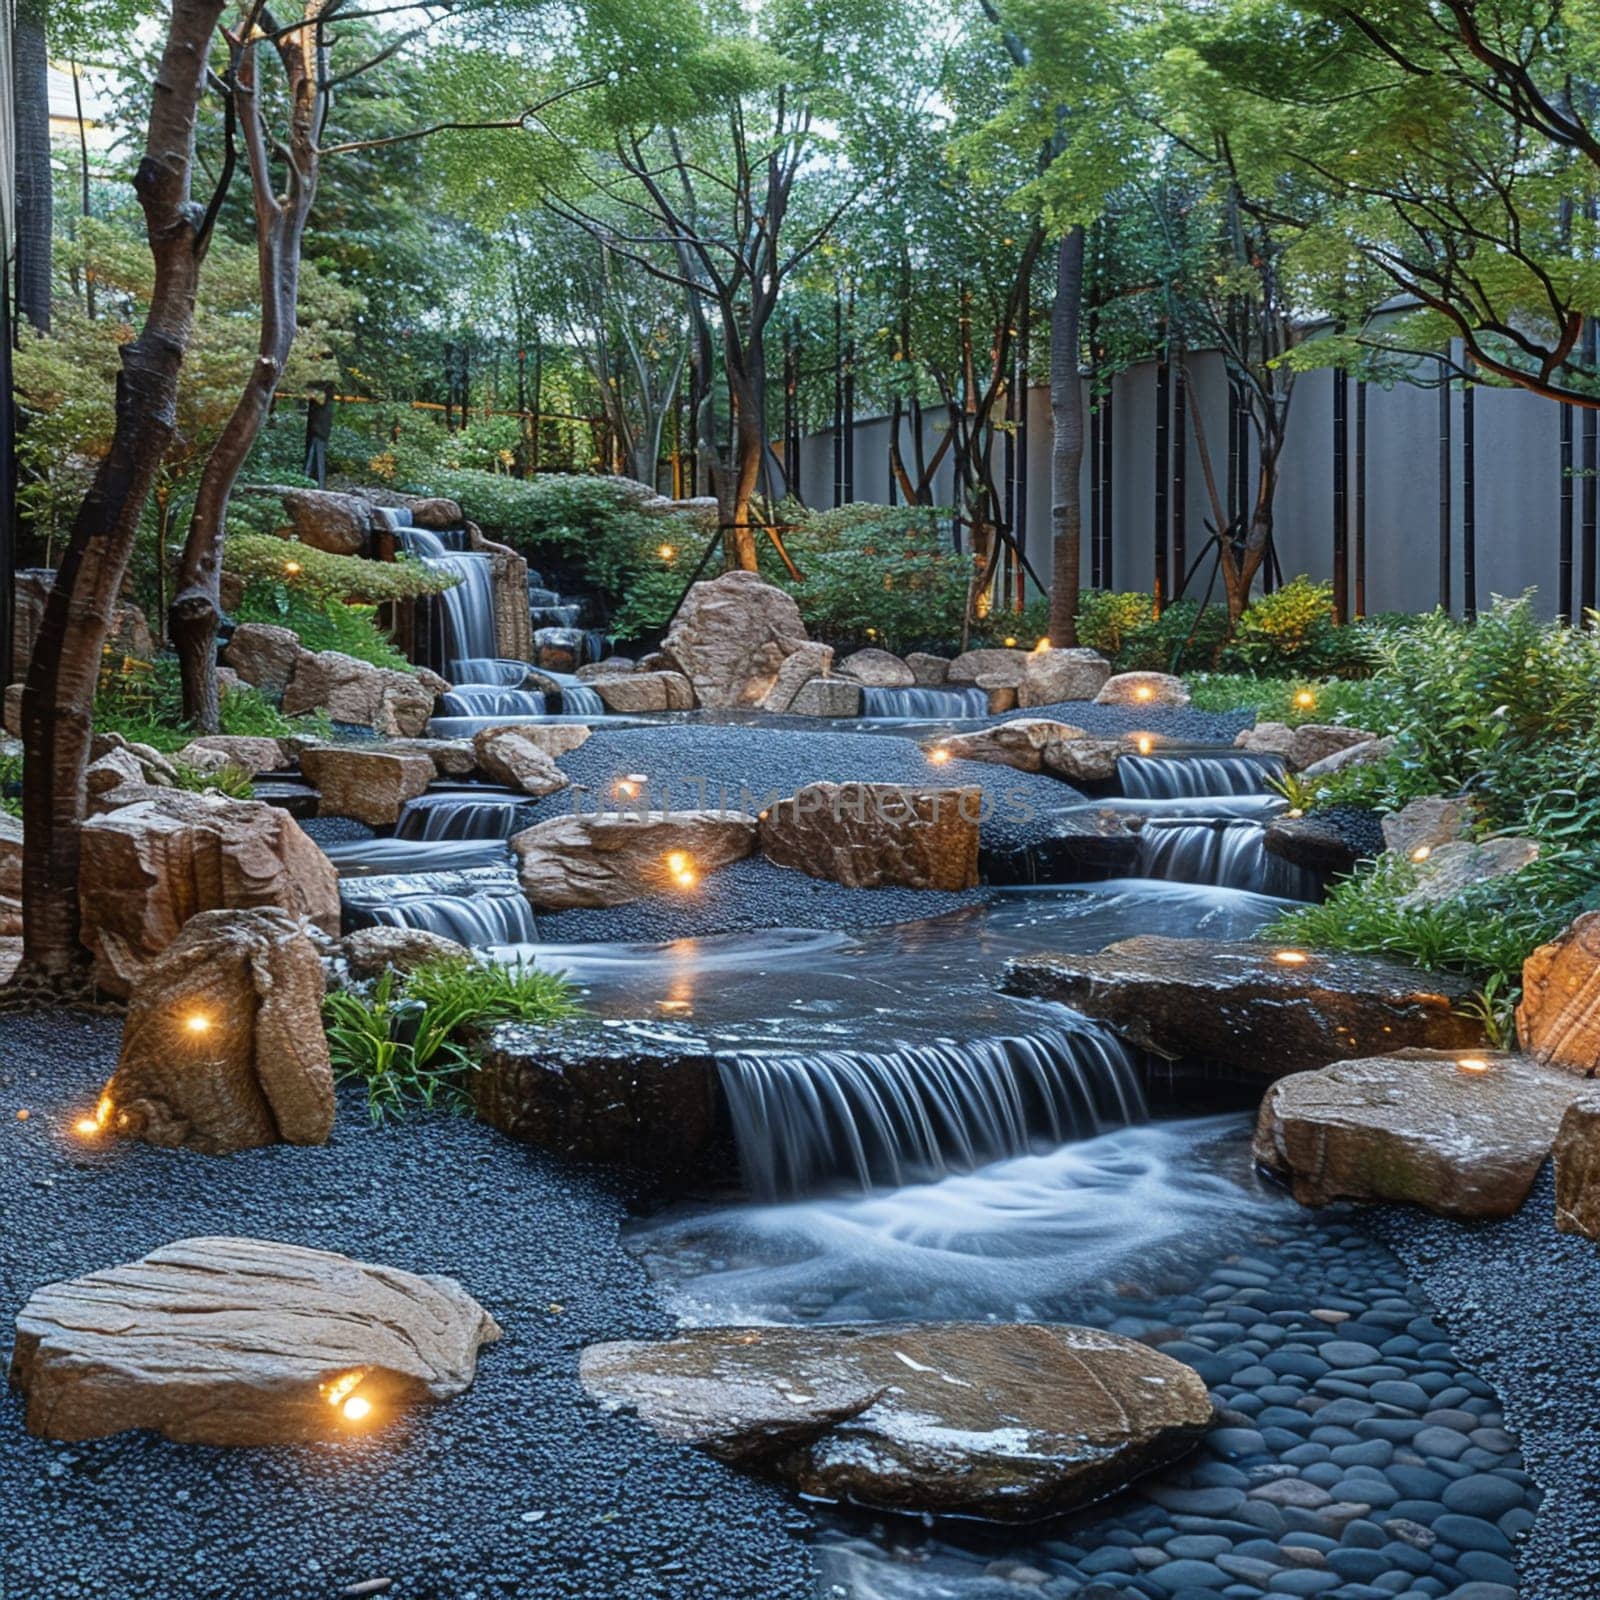 Ornamental Japanese Garden with Traditional Elements, Japanese garden tranquility with aesthetic precision.